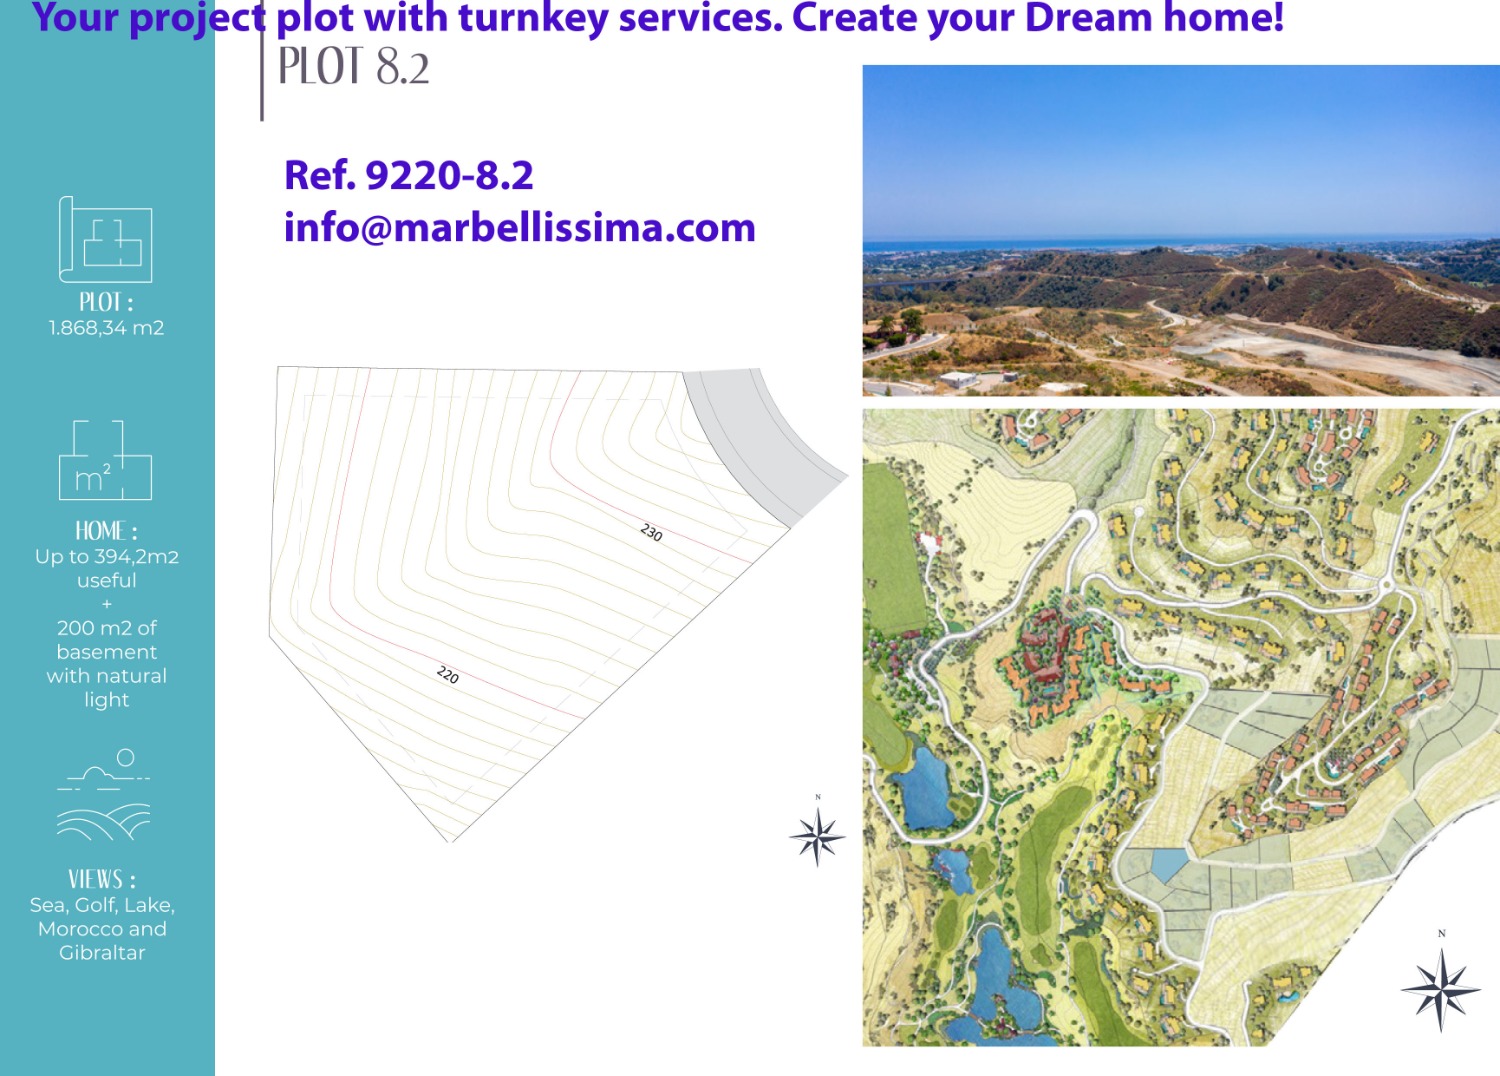 Your project plot with turnkey service and create your contemporary and innovative Dream home .